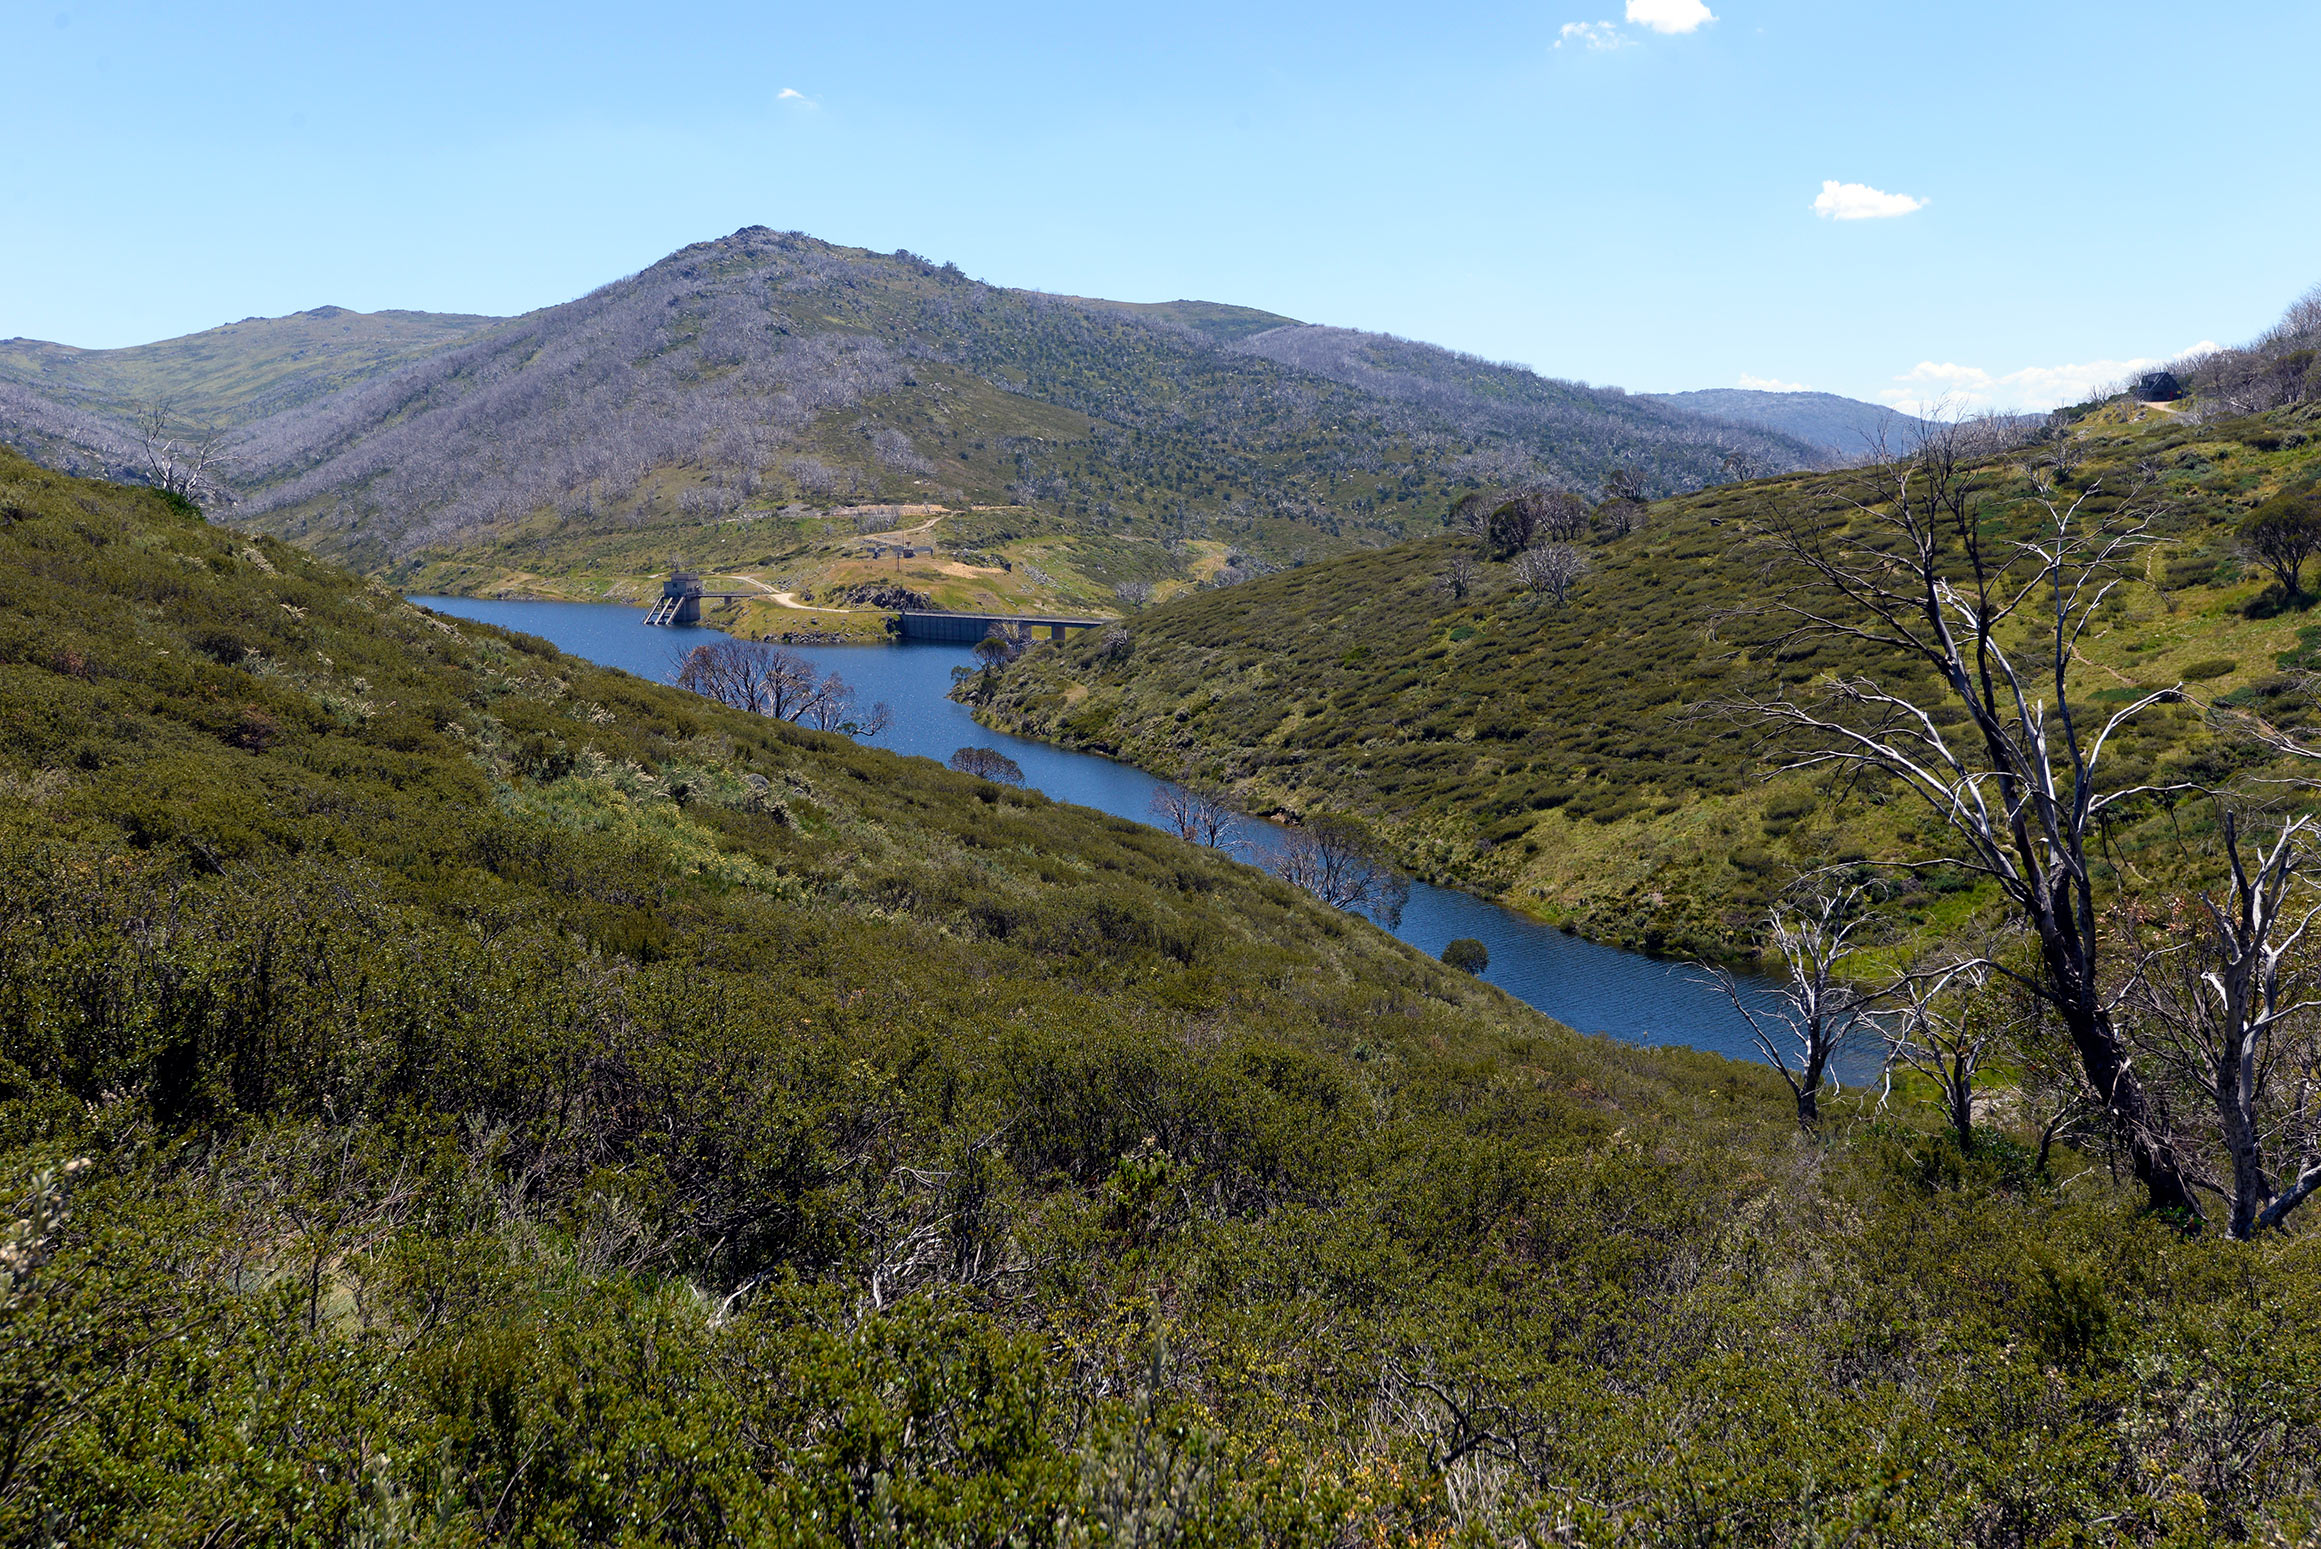 Looking across the Blue Cow Creek arm, with the dam wall and outlet beyond, from the Illawong hiking trail, which offers access to the upper reaches of Guthega Pondage’s Snowy River arm.